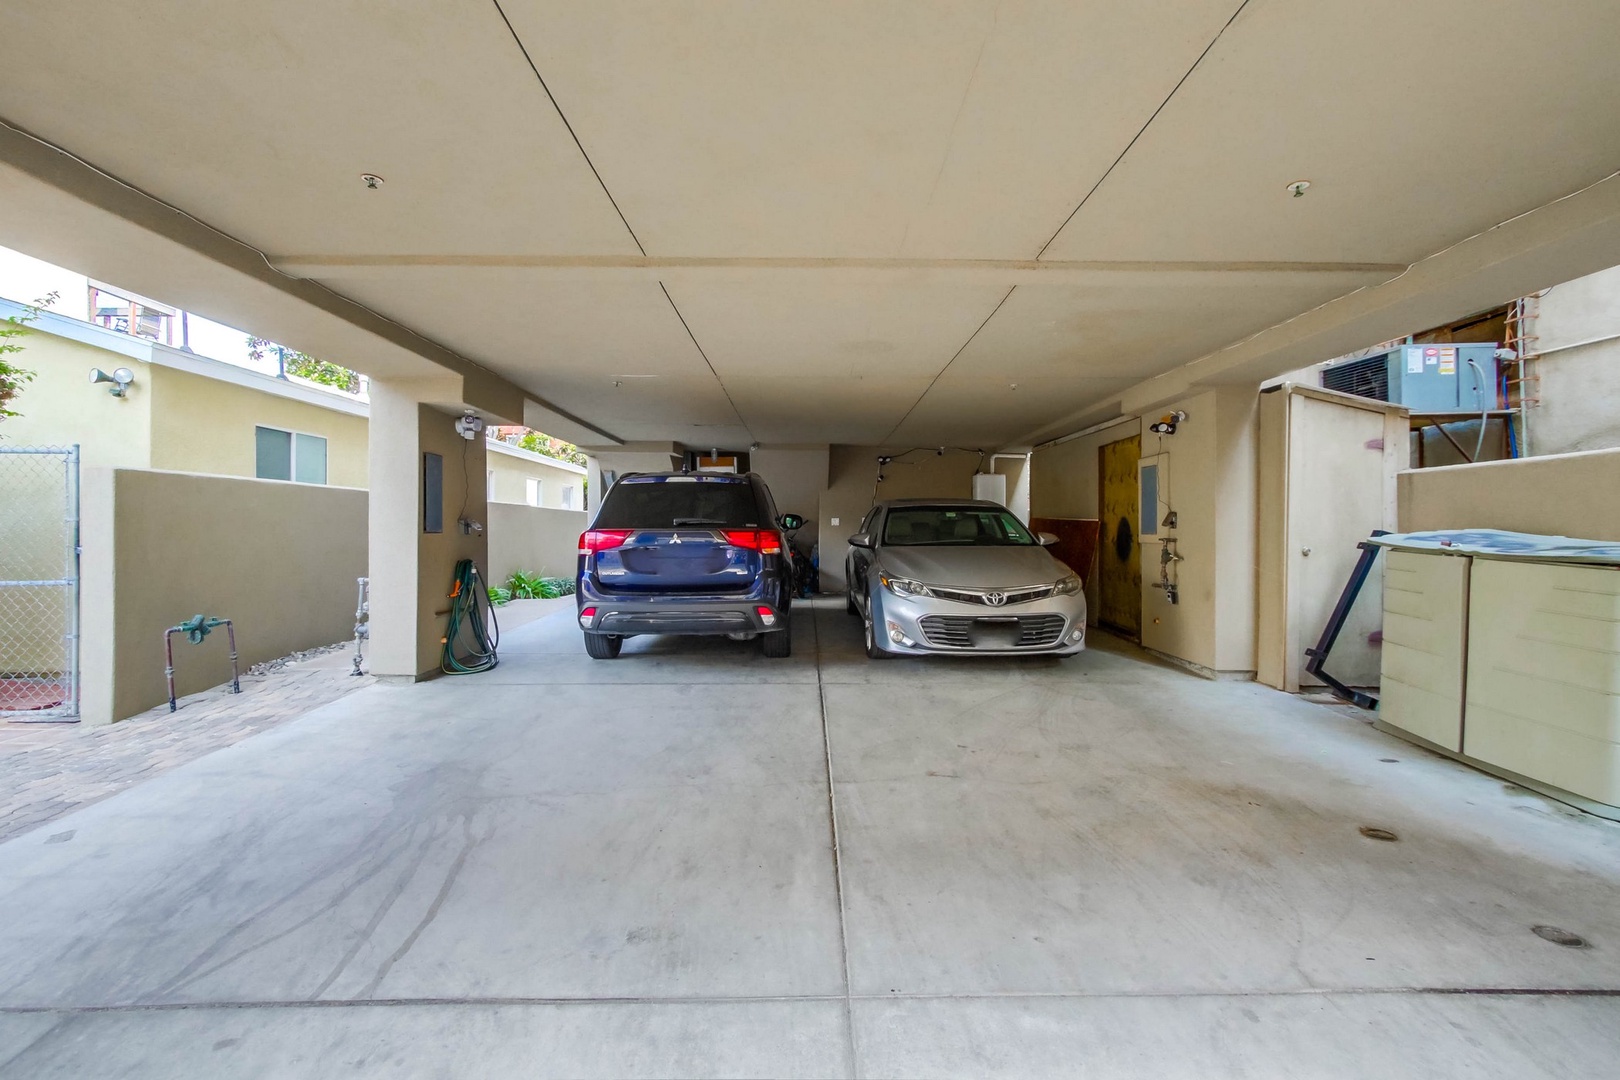 Carport can fit up to 4 smaller vehicles